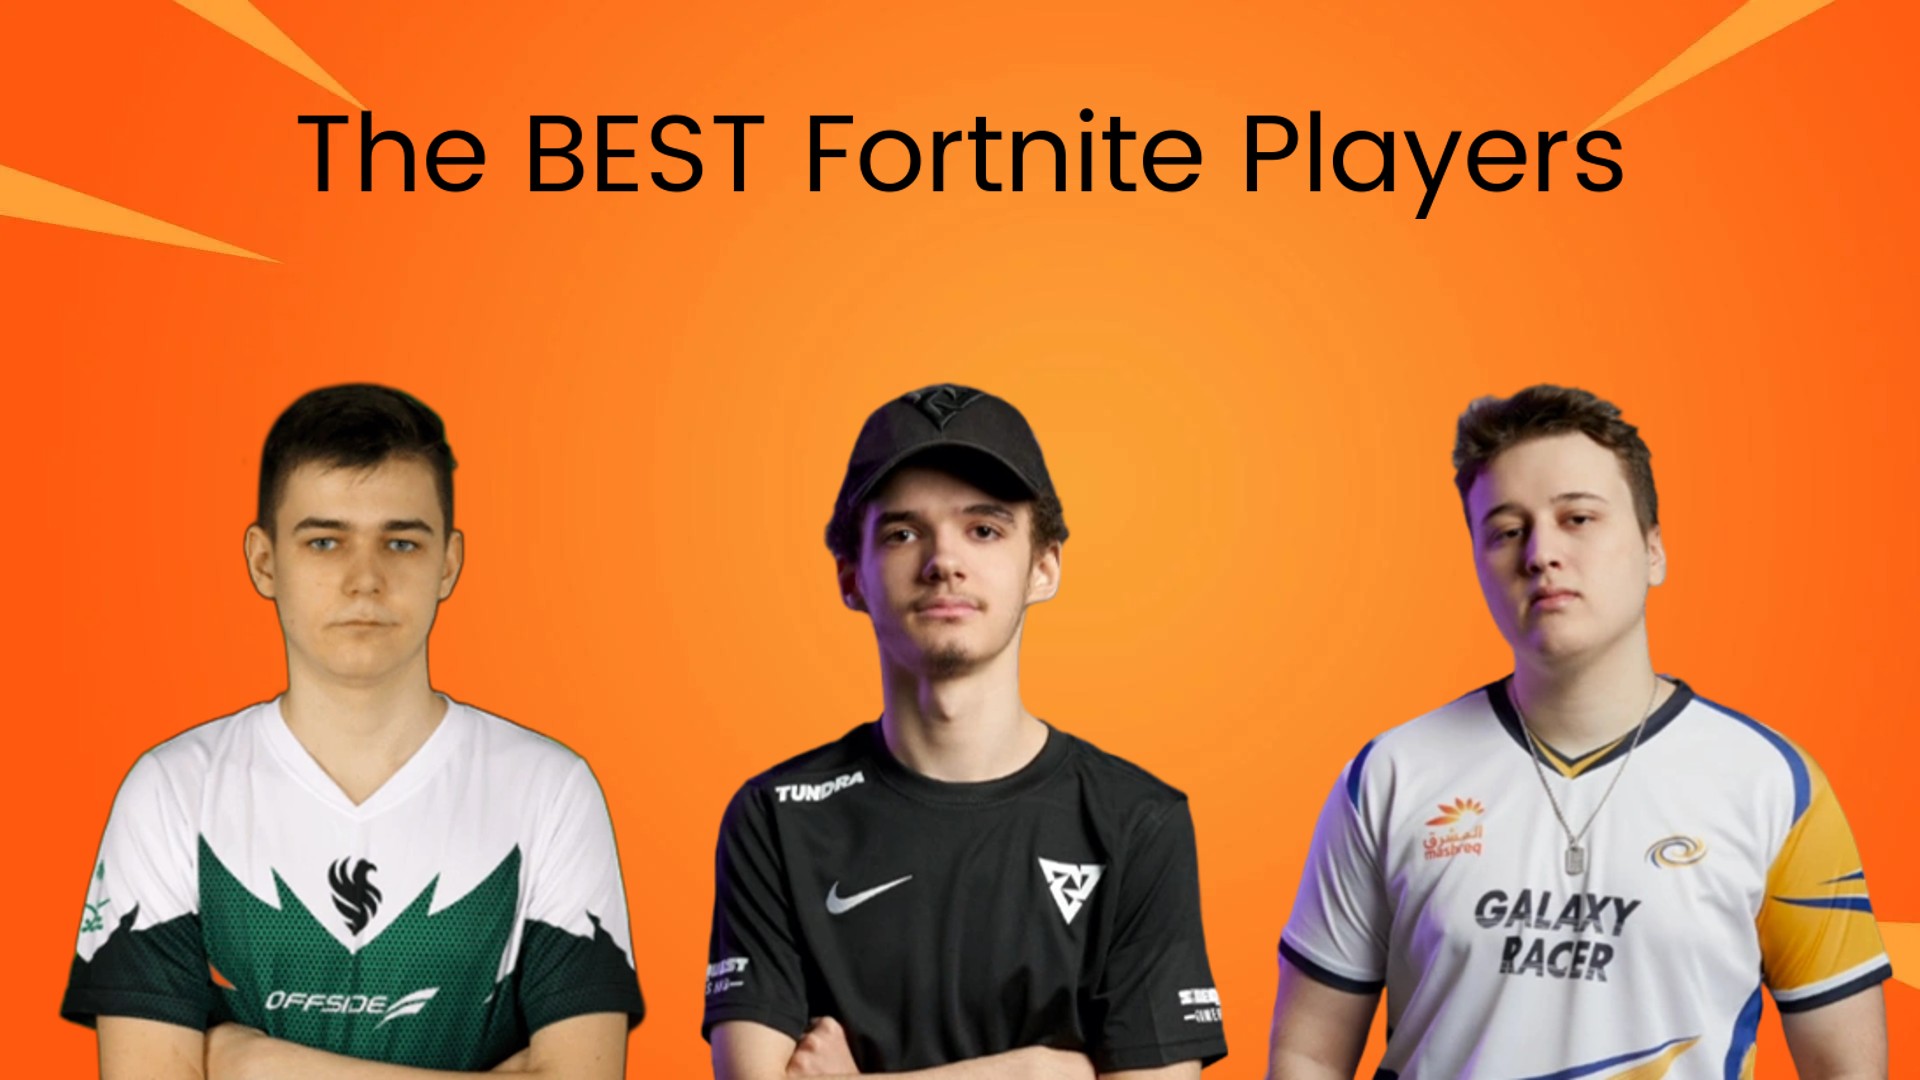 Top 50 Fortnite Players in Chapter 2 (2020)